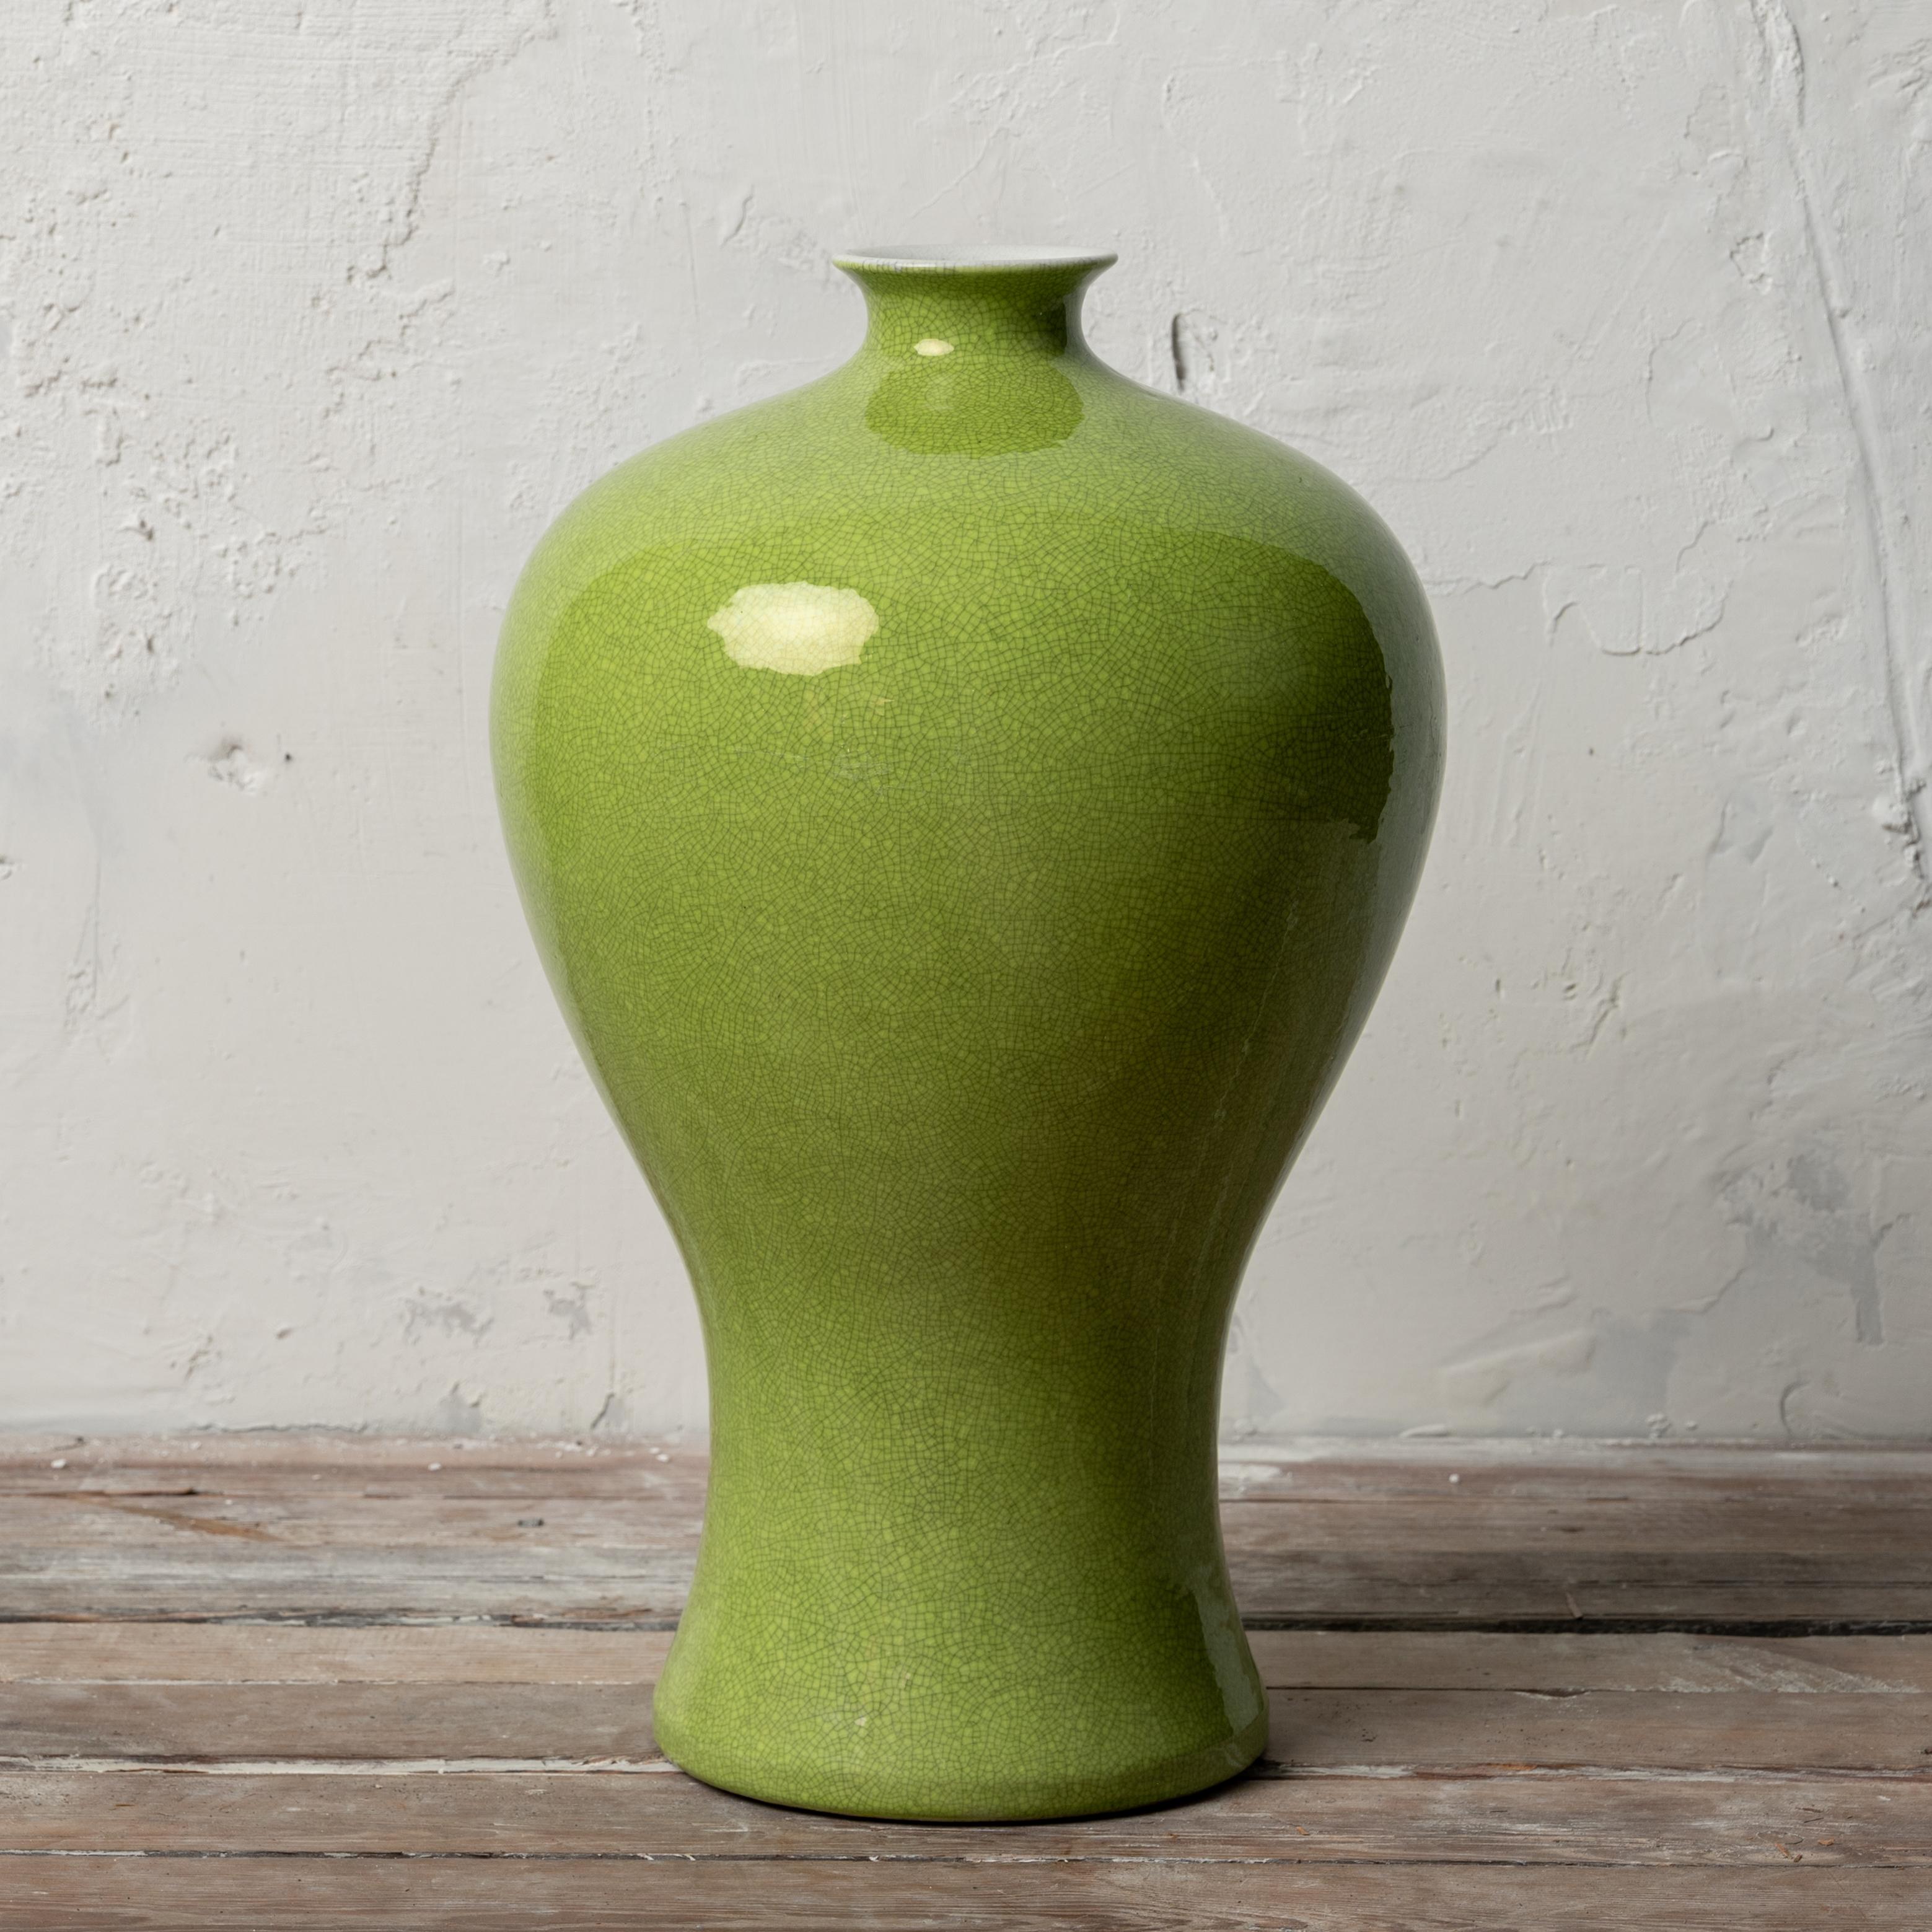 A Chinese monochrome porcelain meiping vase in crackled lime-green glaze with apocryphal Chenghua mark.

10 ½ inches wide by 17 inches tall

